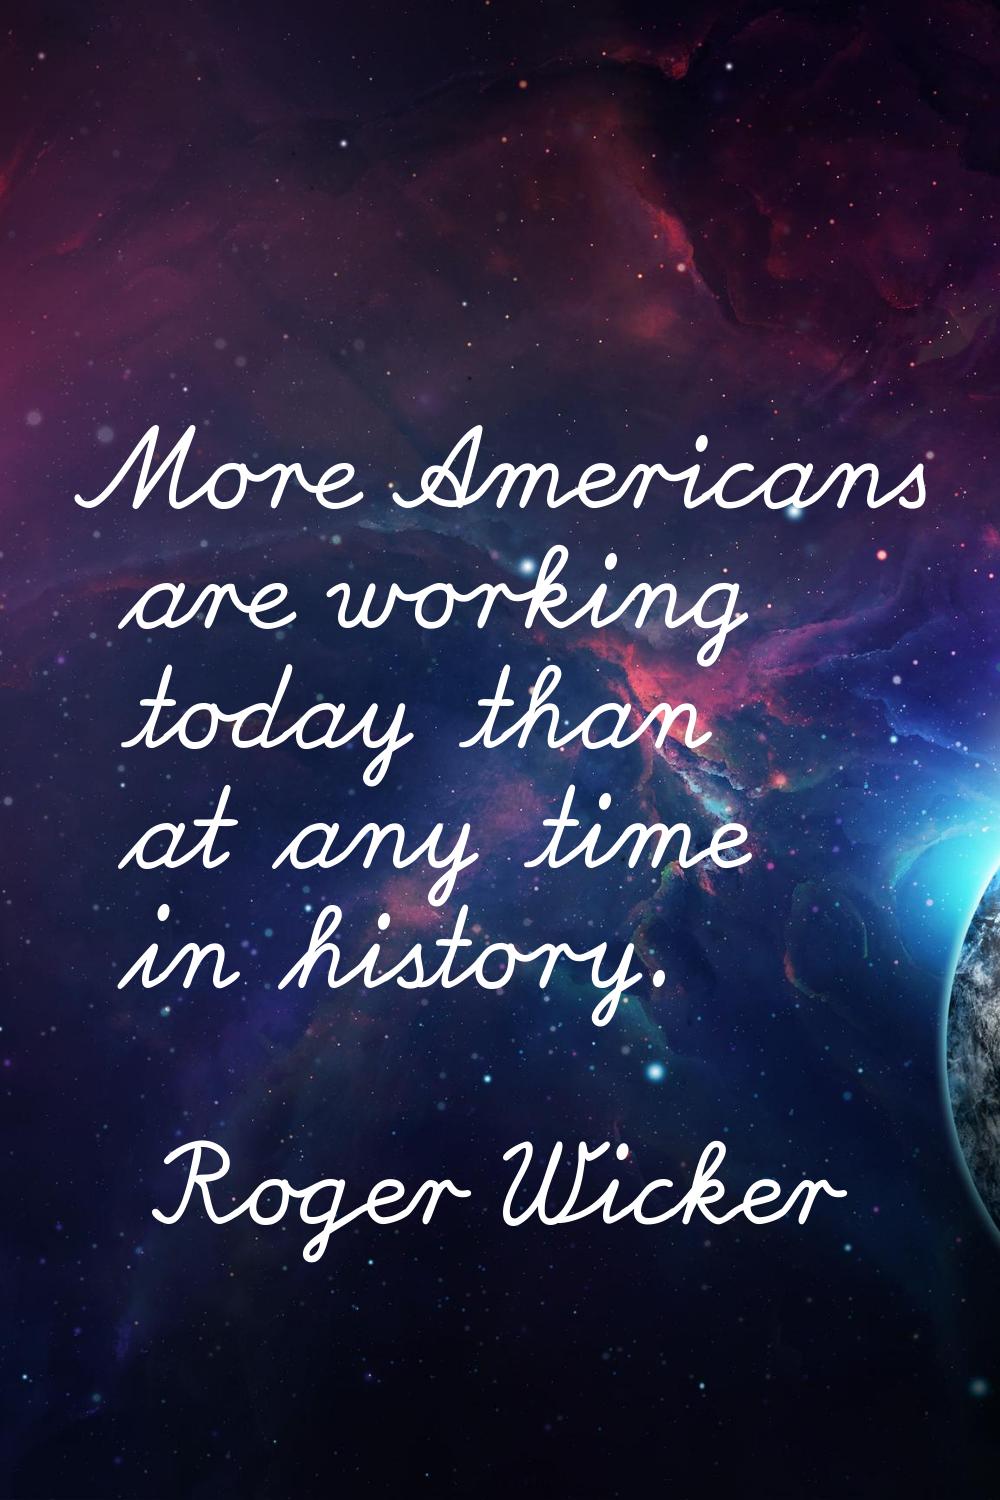 More Americans are working today than at any time in history.